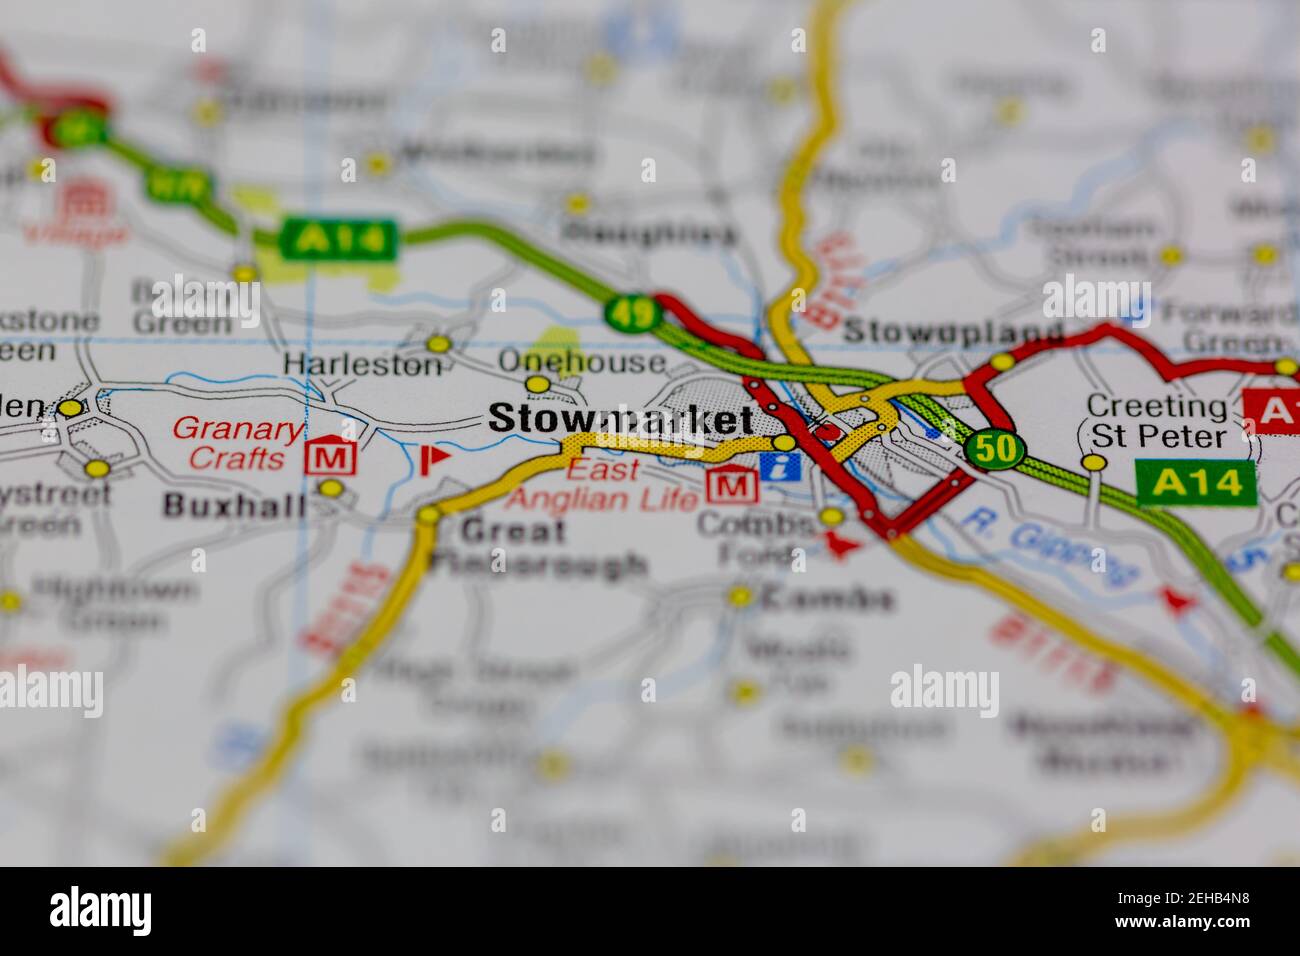 Stowmarket And Surrounding Areas Shown On A Road Map Or Geography Map 2EHB4N8 